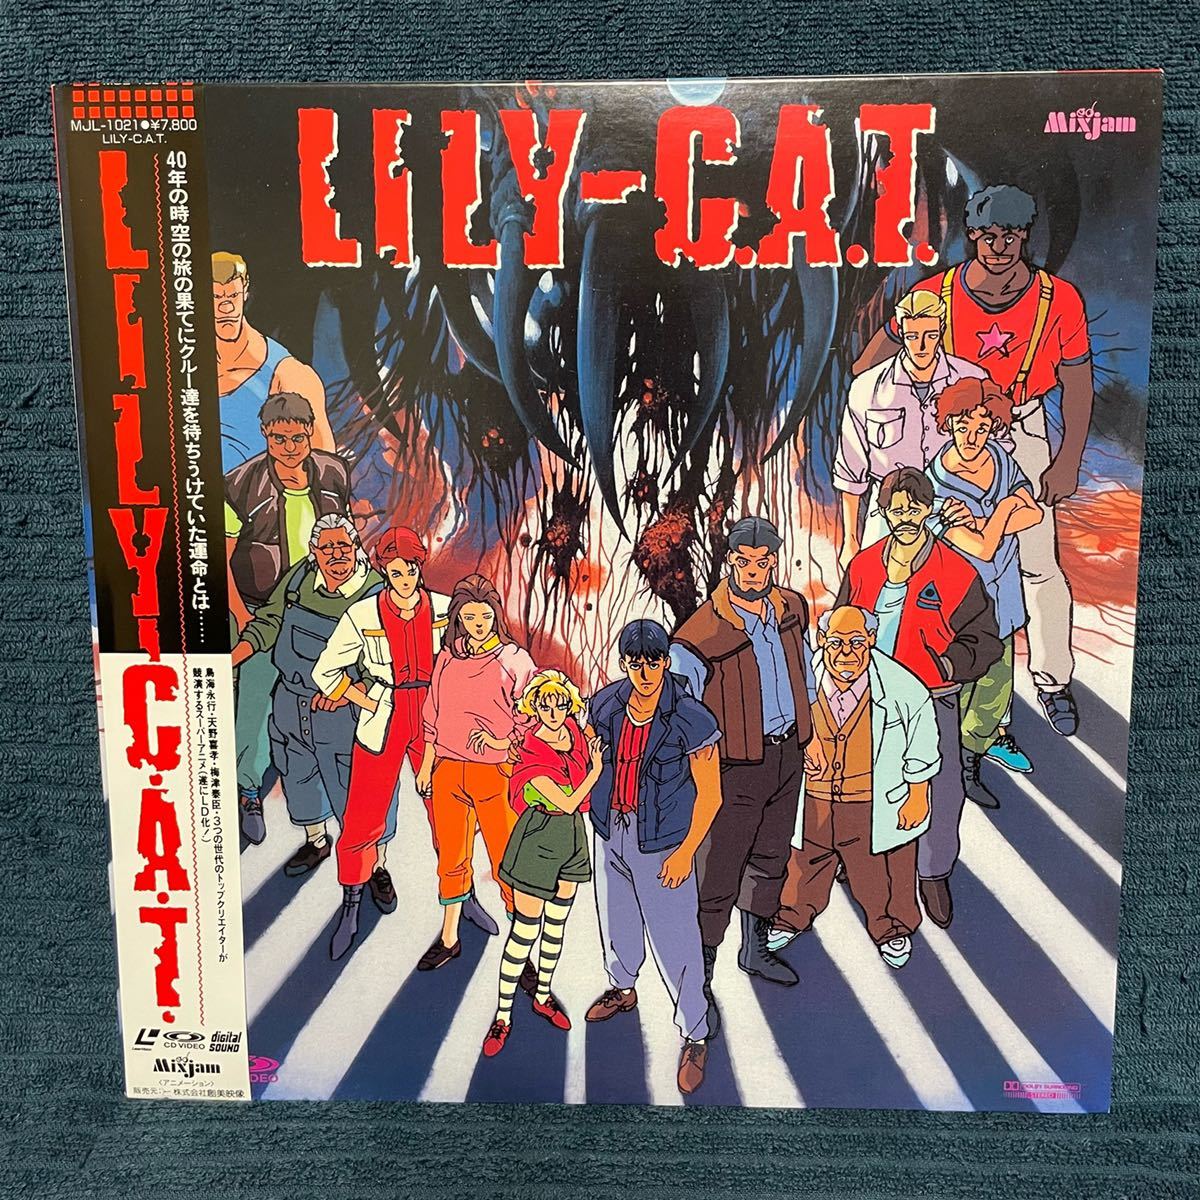 [ record quality excellent ] [LD LILY-C.A.T.] operation not yet verification Junk obi attaching cell version MJL-1021 bird sea . line lili.* cat laser disk 